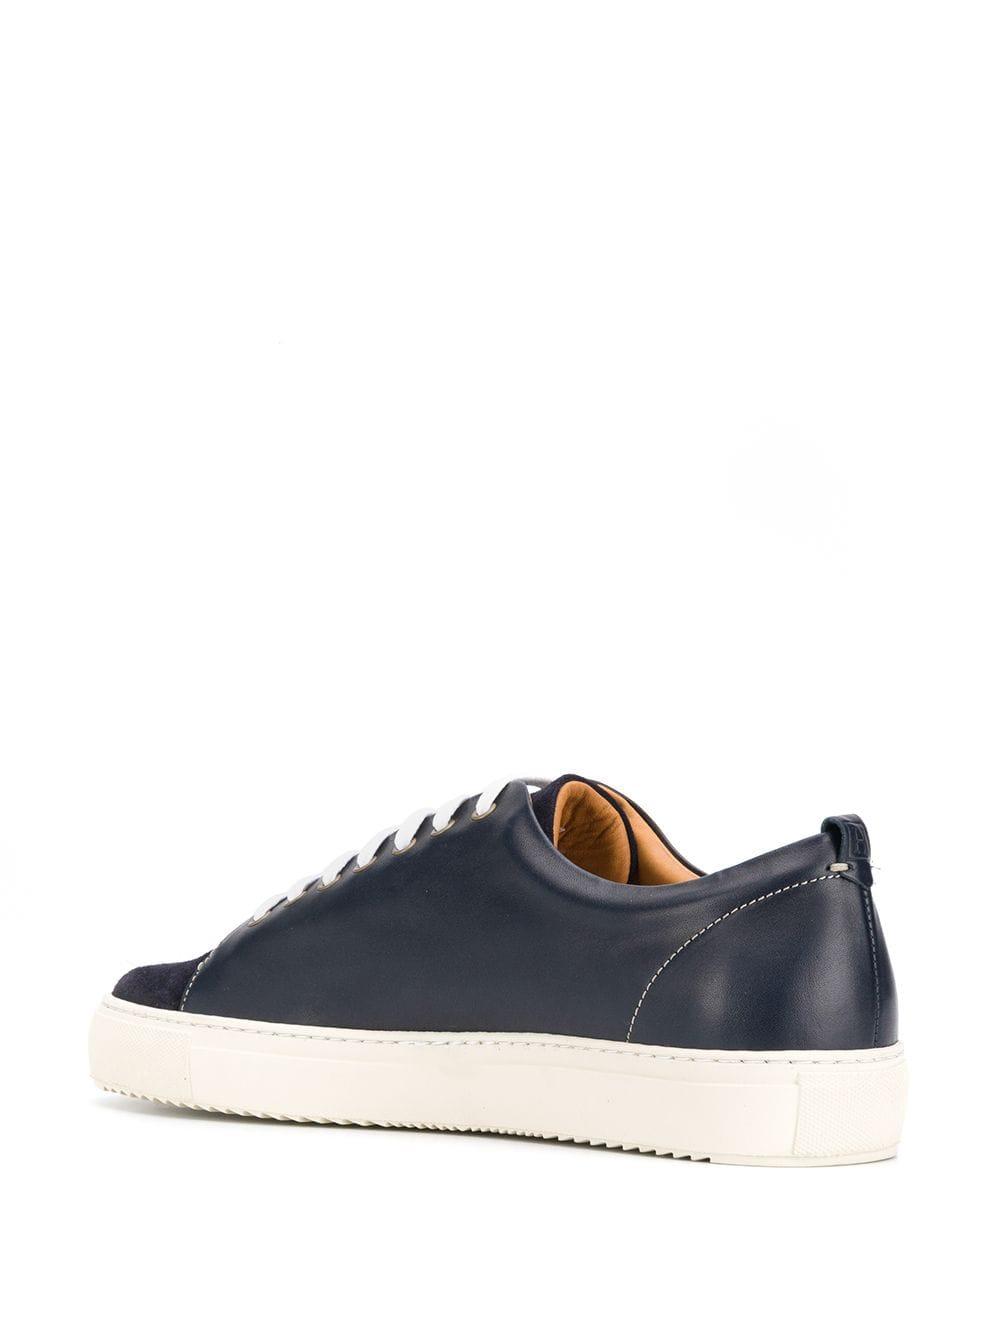 Hackett Lace-up Sneakers in Blue for Men - Lyst